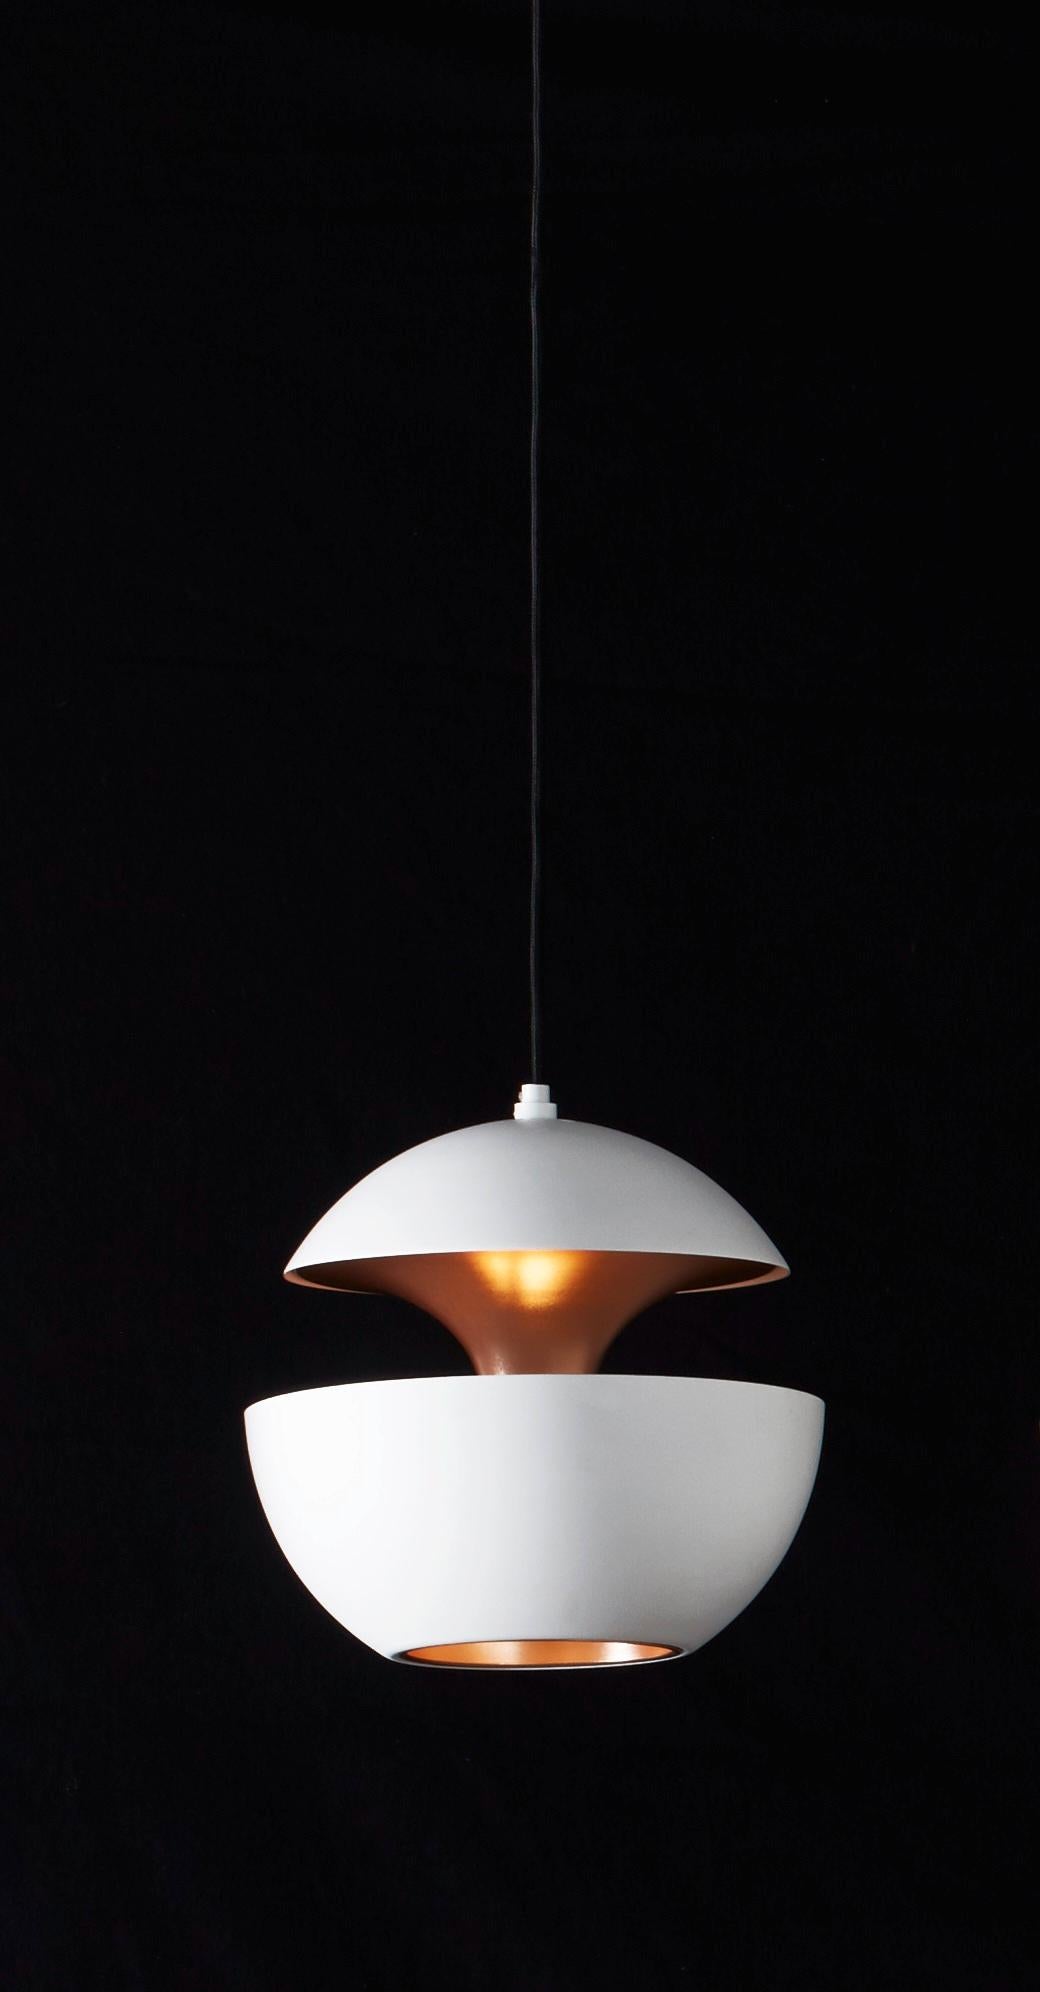 Here comes the sun small white and copper pendant lamp by Bertrand Balas
Dimensions: D 17.5 x H 17.5 cm
Materials: Aluminum
Available in different sizes and colors.

All our lamps can be wired according to each country. If sold to the USA it